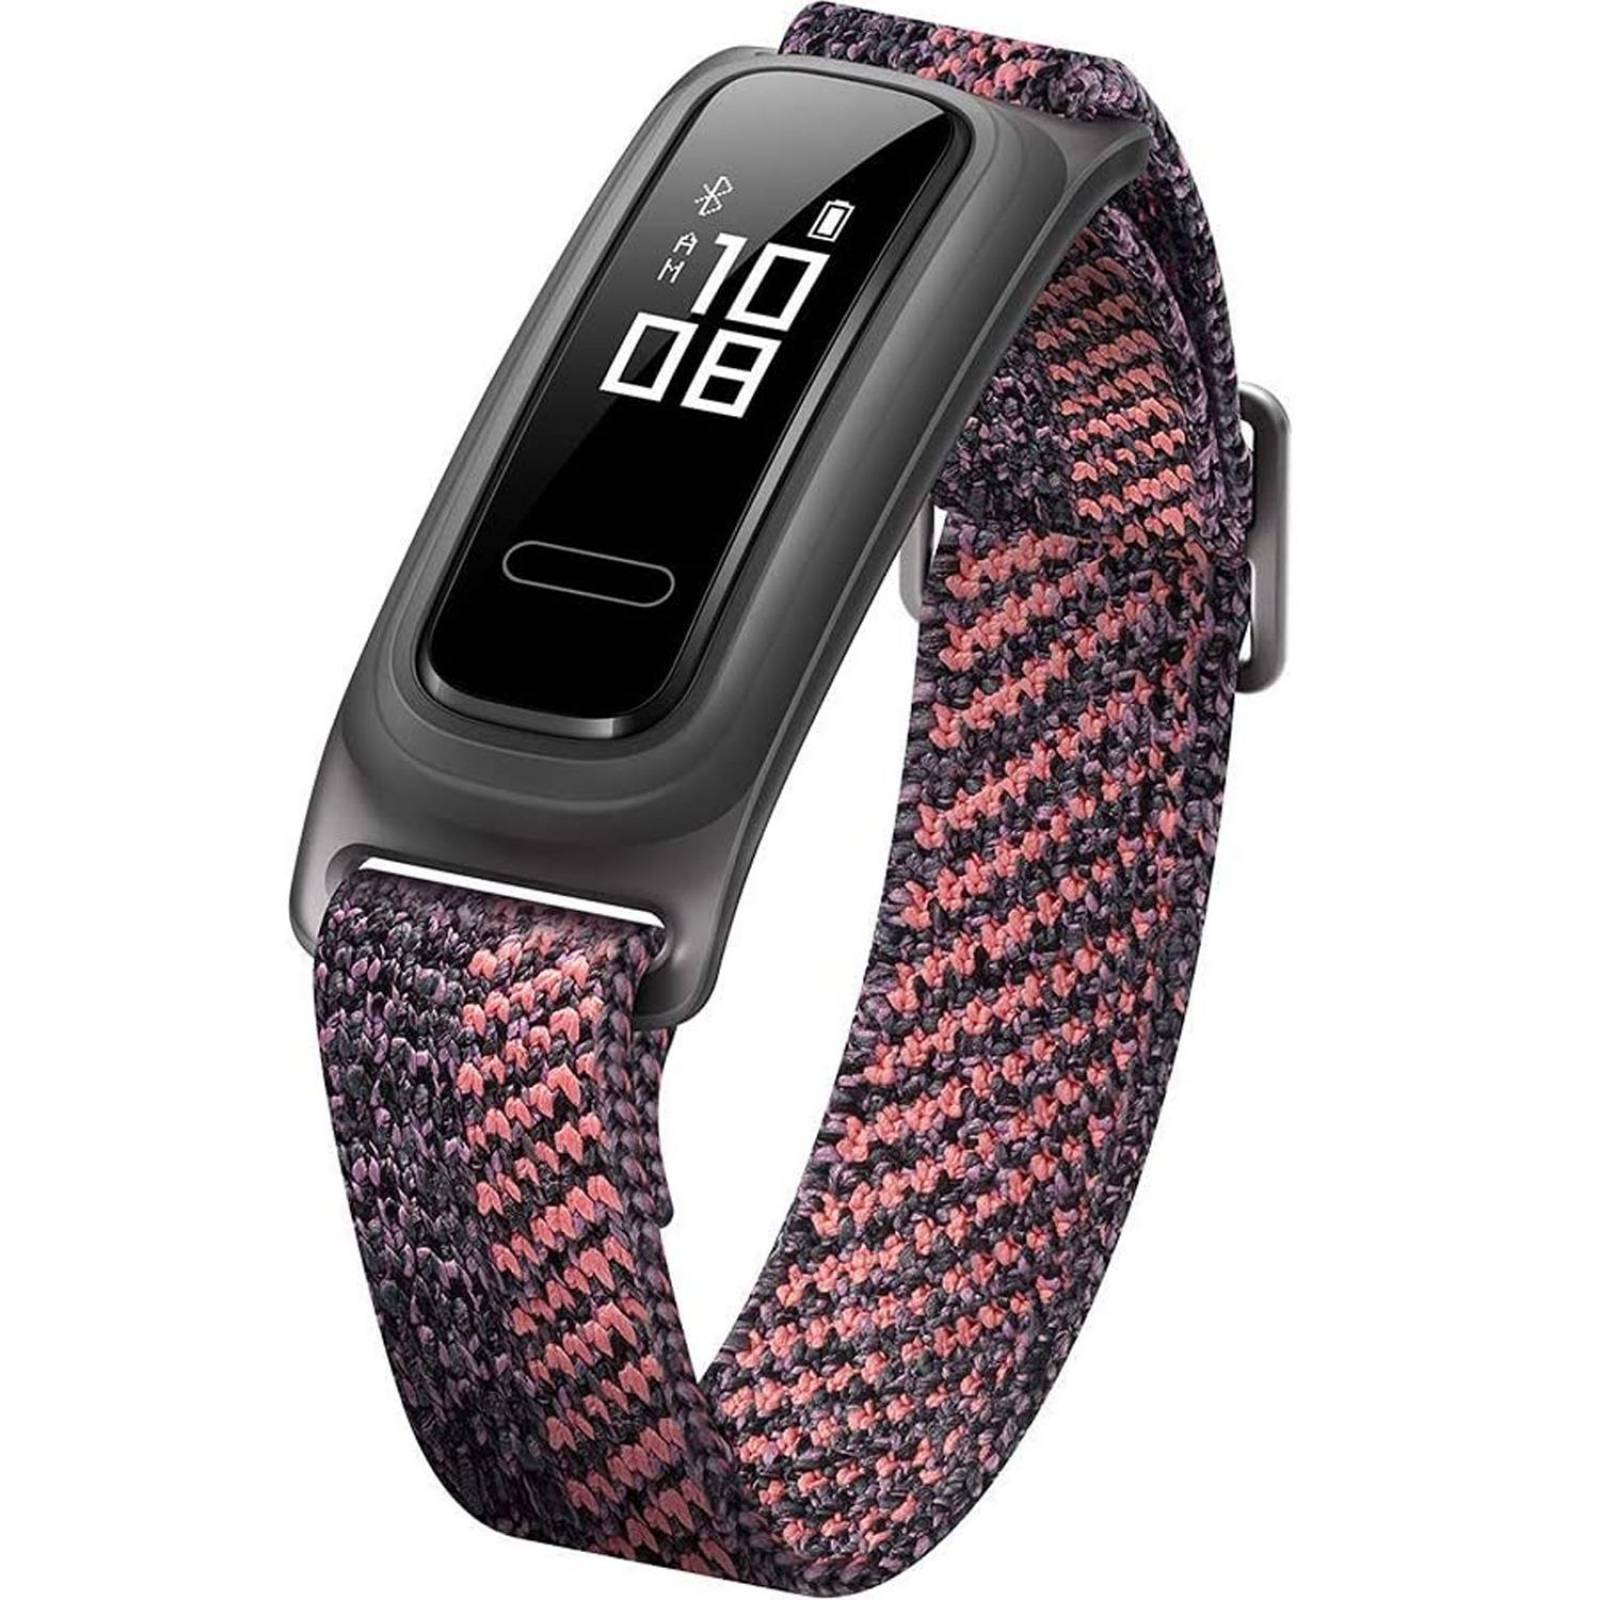 Smartband HUAWEI Band 4E AW70 Touch Bluetooth Android 